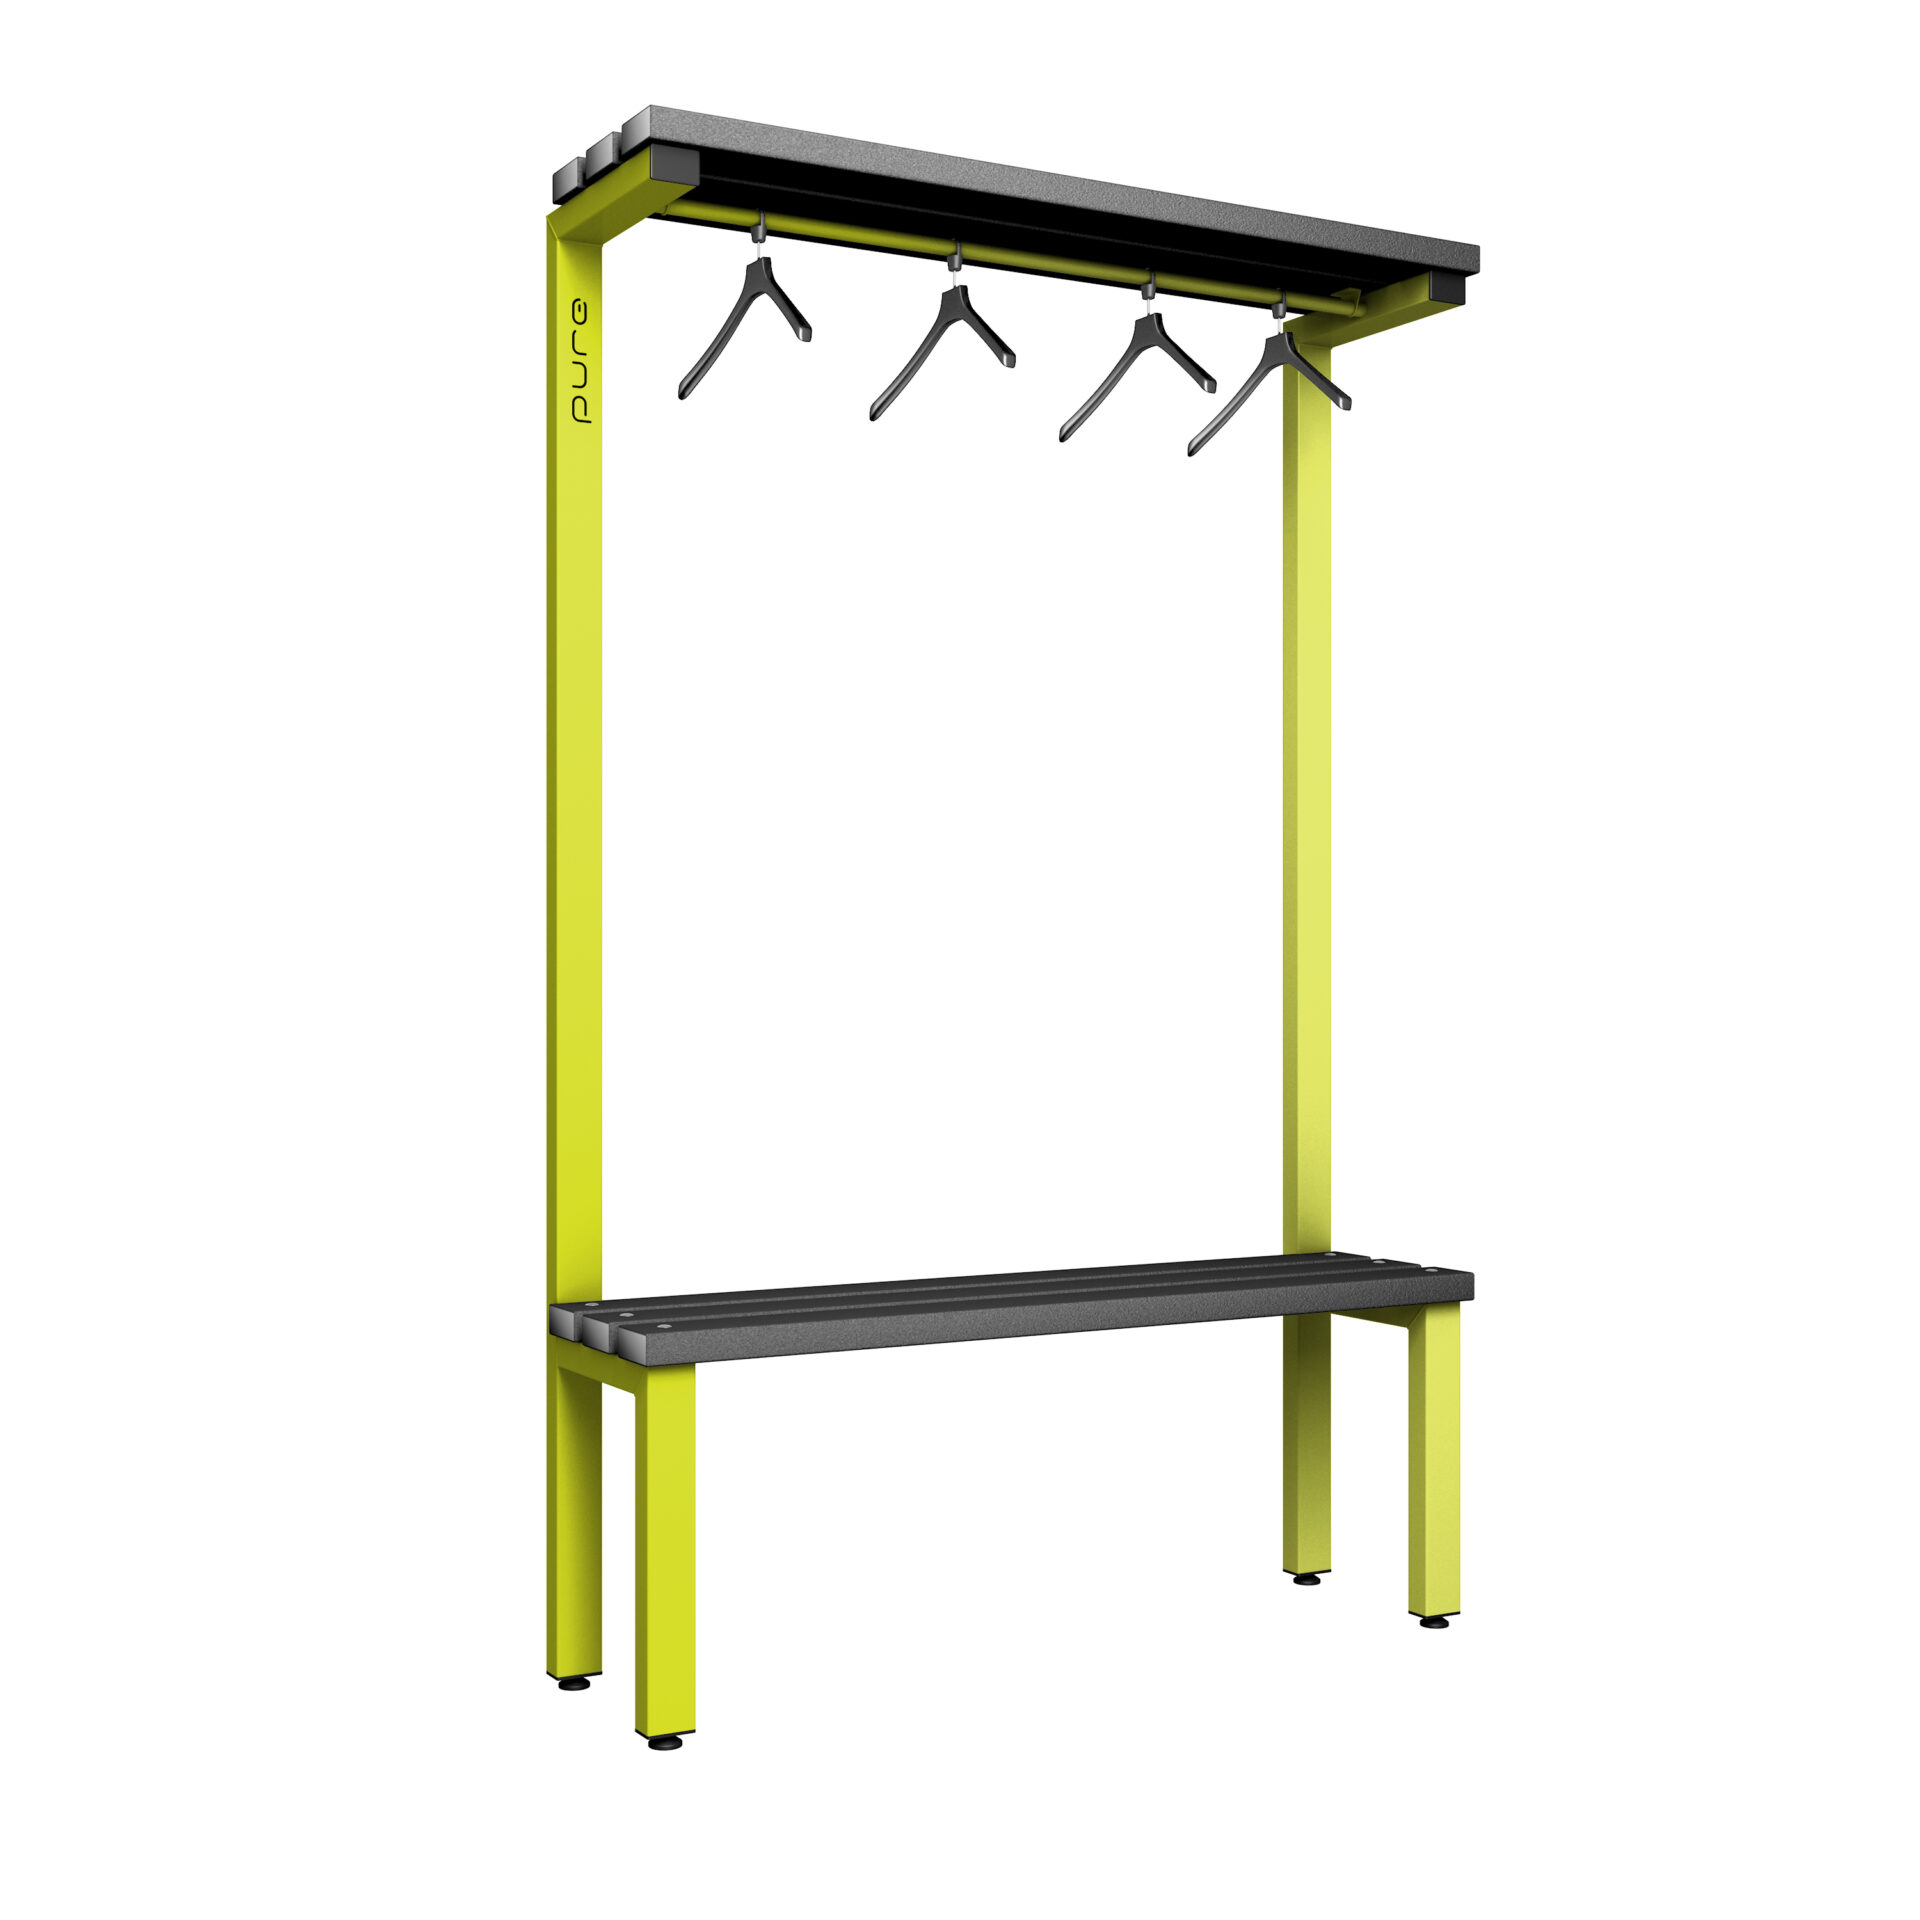 Pure Carbon Zero Single Sided 1200mm Overhead Hanging Bench